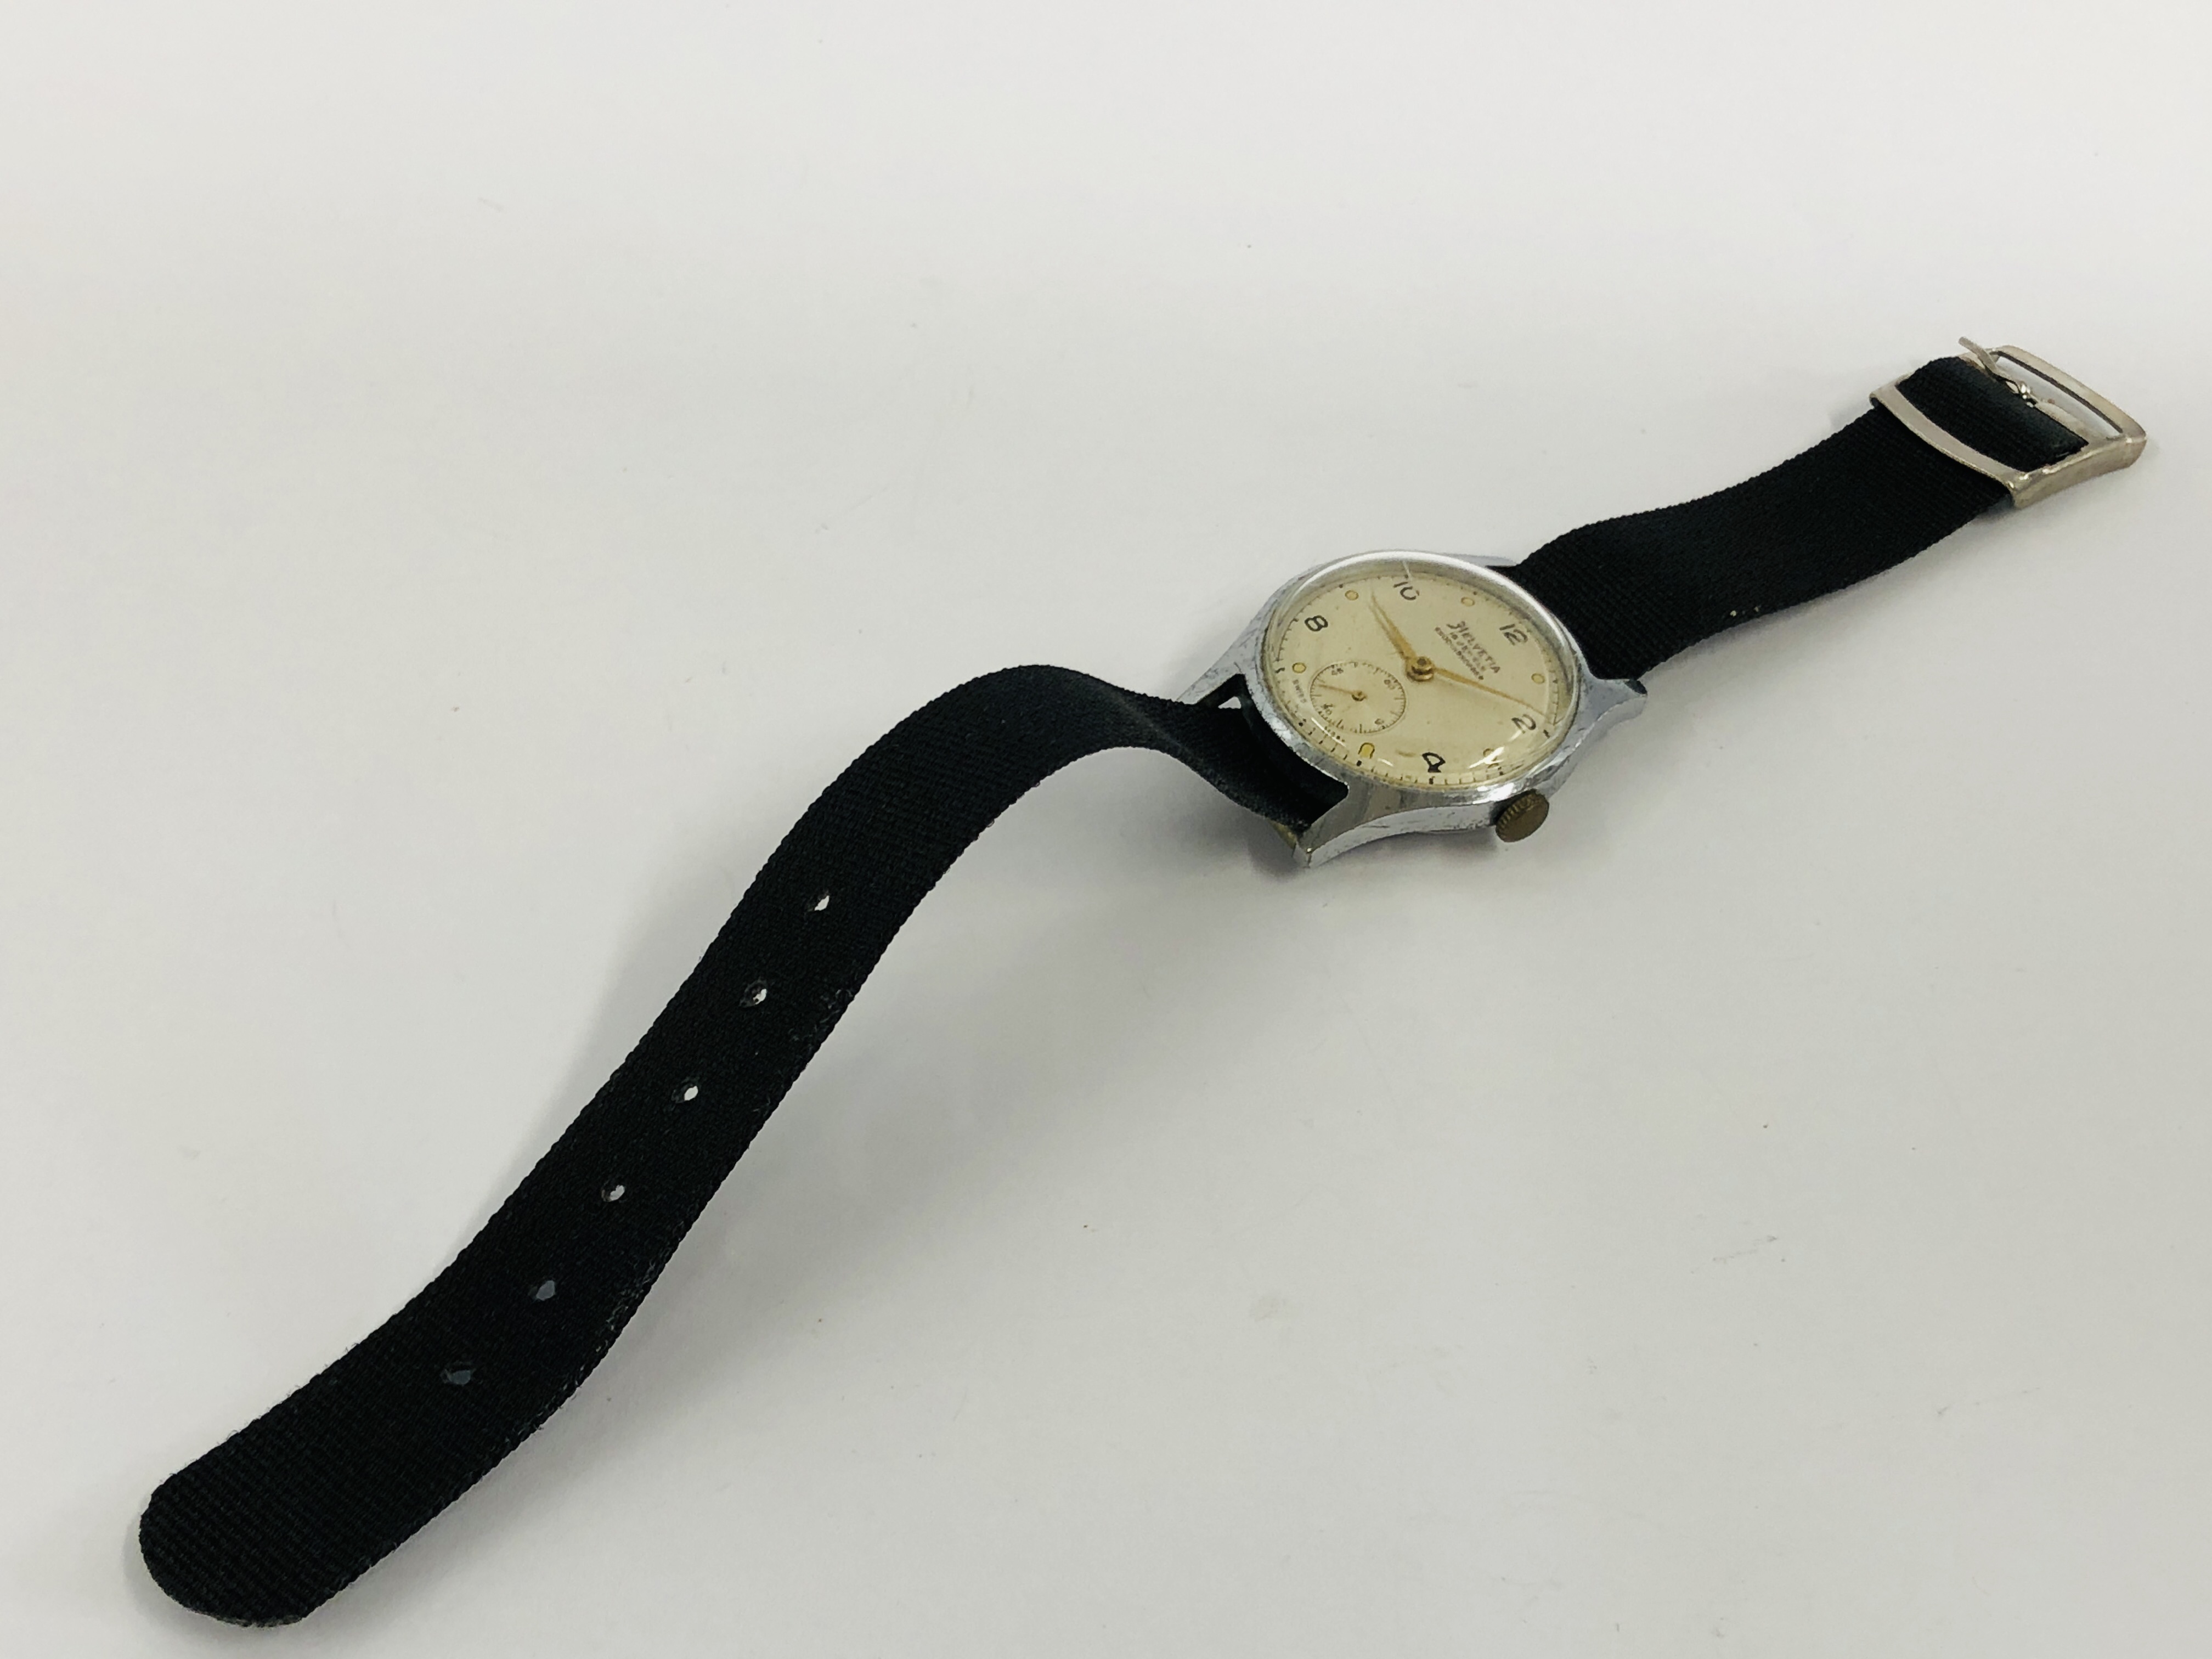 VINTAGE WRIST WATCH MARKED "HELVETIA" SWISS MADE, - Image 8 of 8